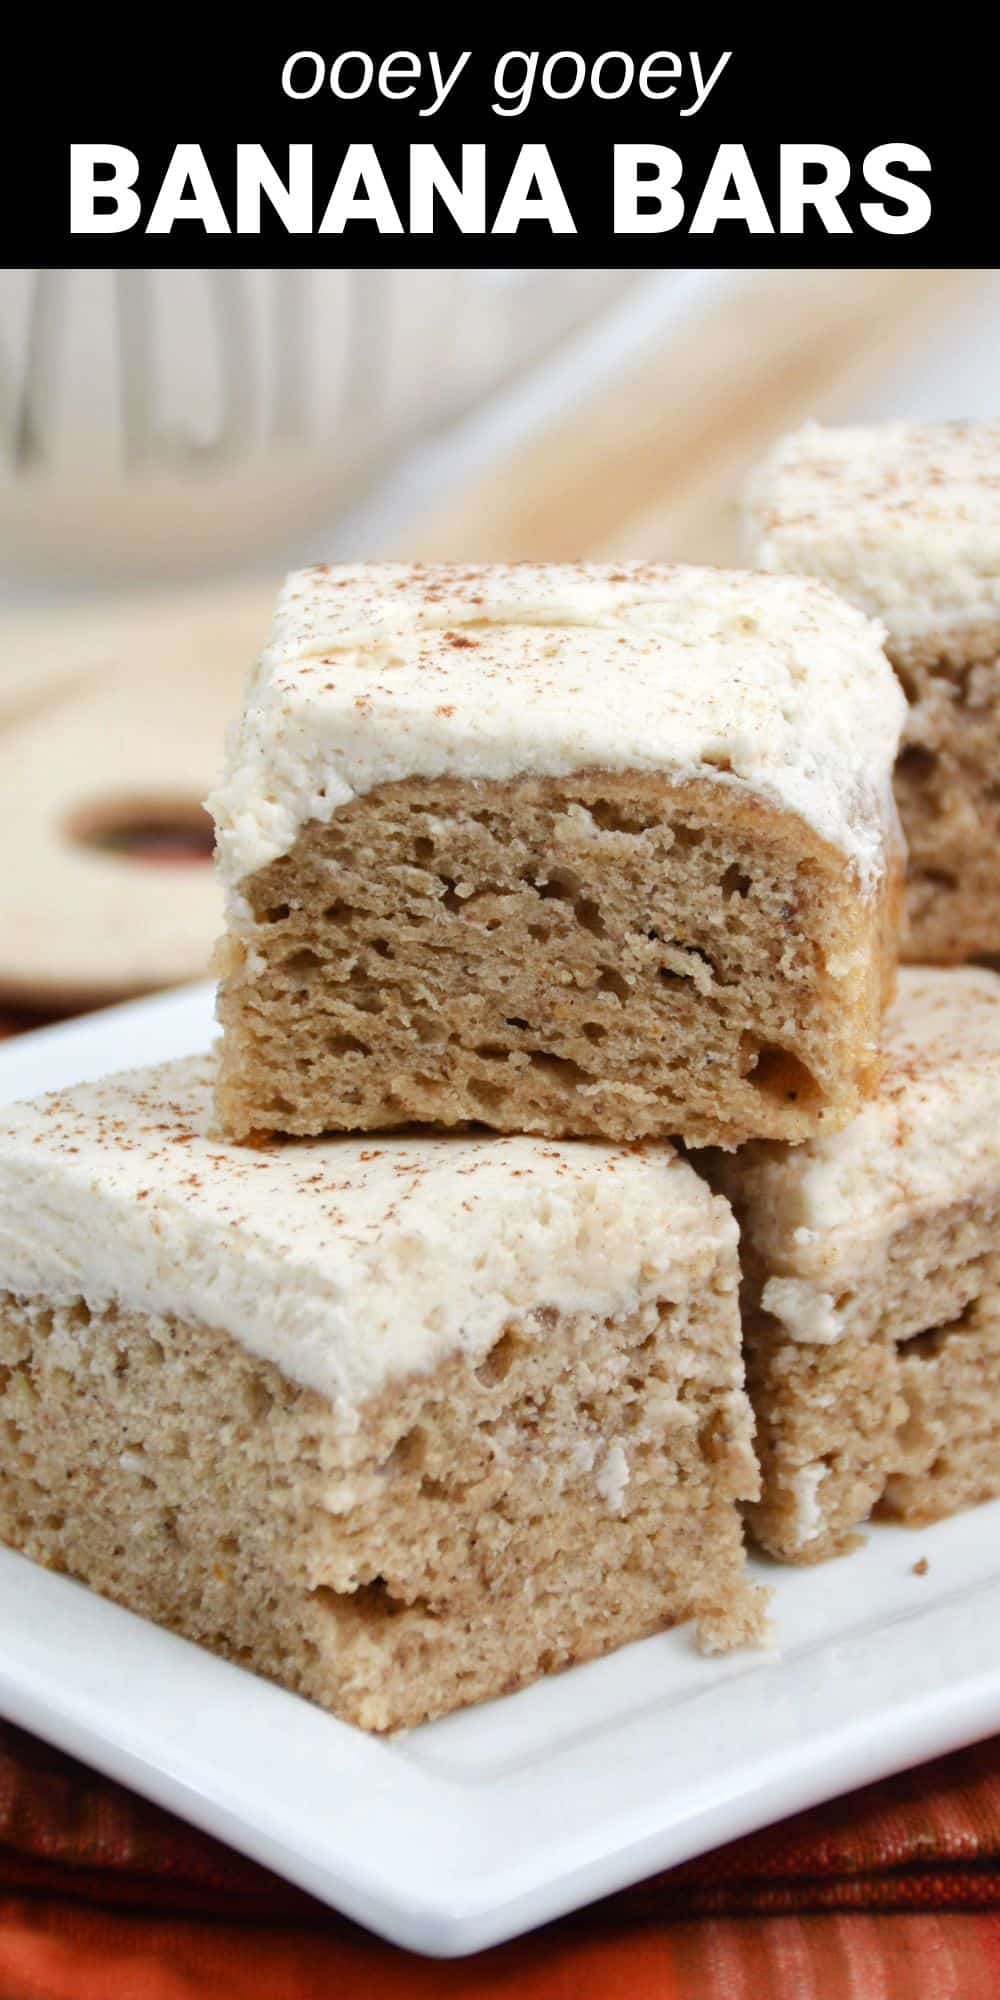 These ooey gooey banana bars really live up to their name. They feature a buttery sweet and moist banana cake that pairs perfectly with a creamy and delicious caramel frosting. The flavor and texture of these bars is truly incredible - they’ll be a perfect addition to any party, a treat the whole family will love, and a new favorite way to use up those leftover bananas!